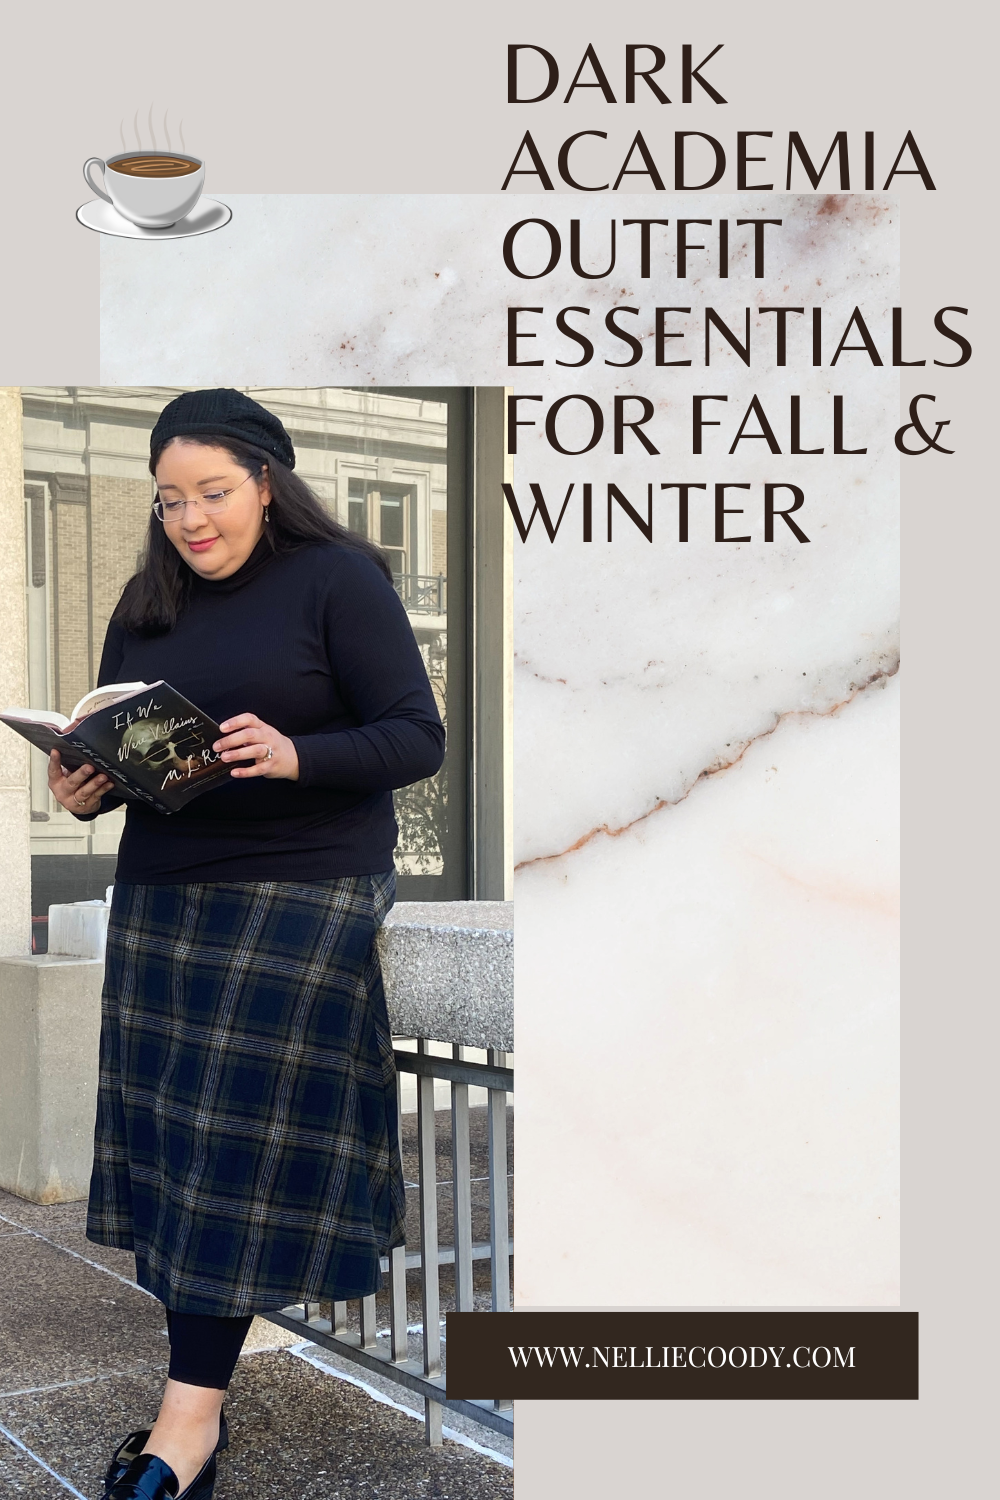 <strong>Dark Academia Essentials for Fall & Winter</strong>